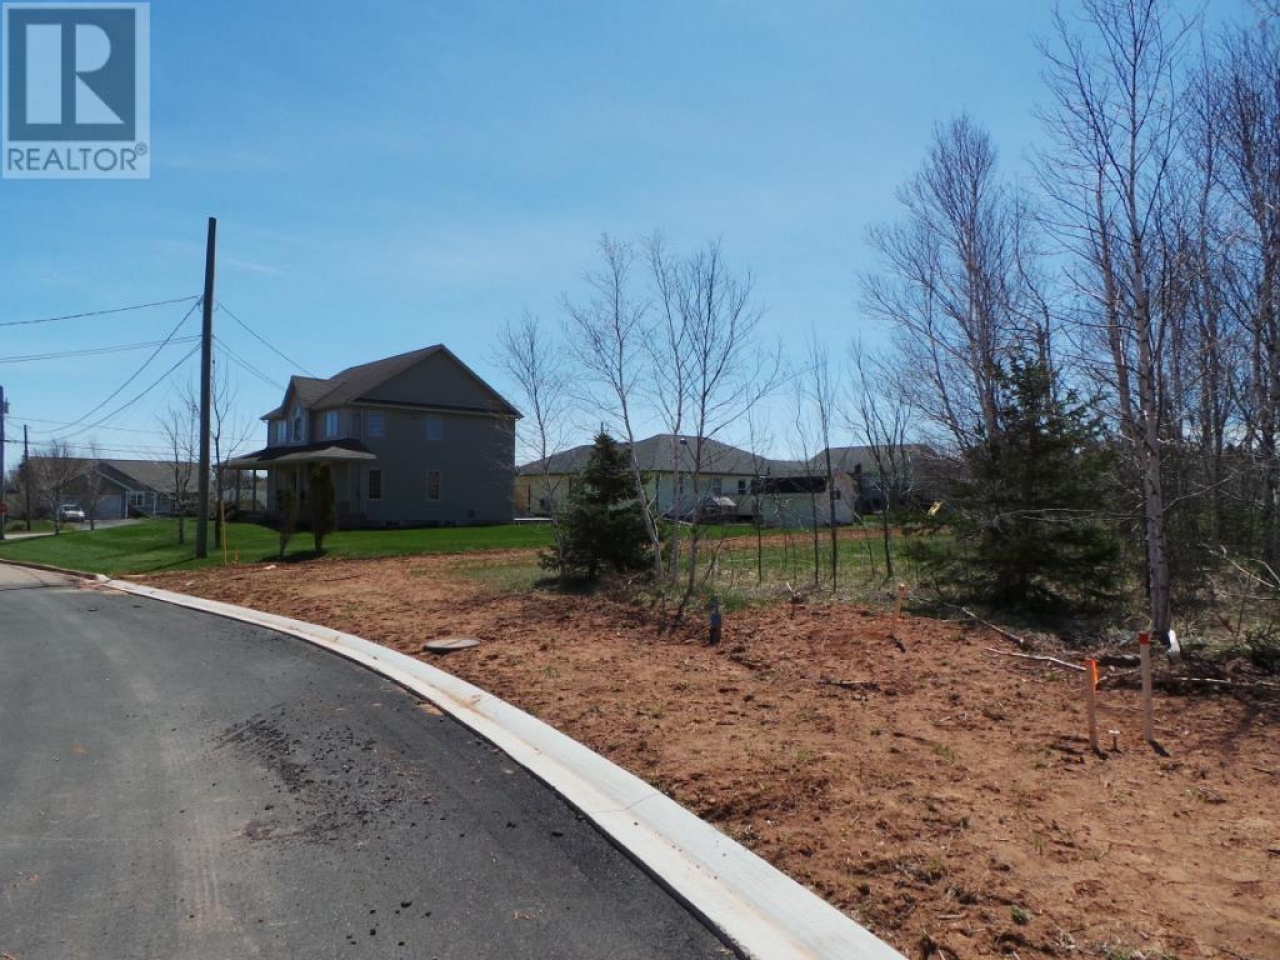 Lot 20-1 Waterview HeightsLot 20-1 Waterview Heights, Summerside, Prince Edward Island C1N6H5, ,Vacant Land,For Sale,Lot 20-1 Waterview Heights,202111401